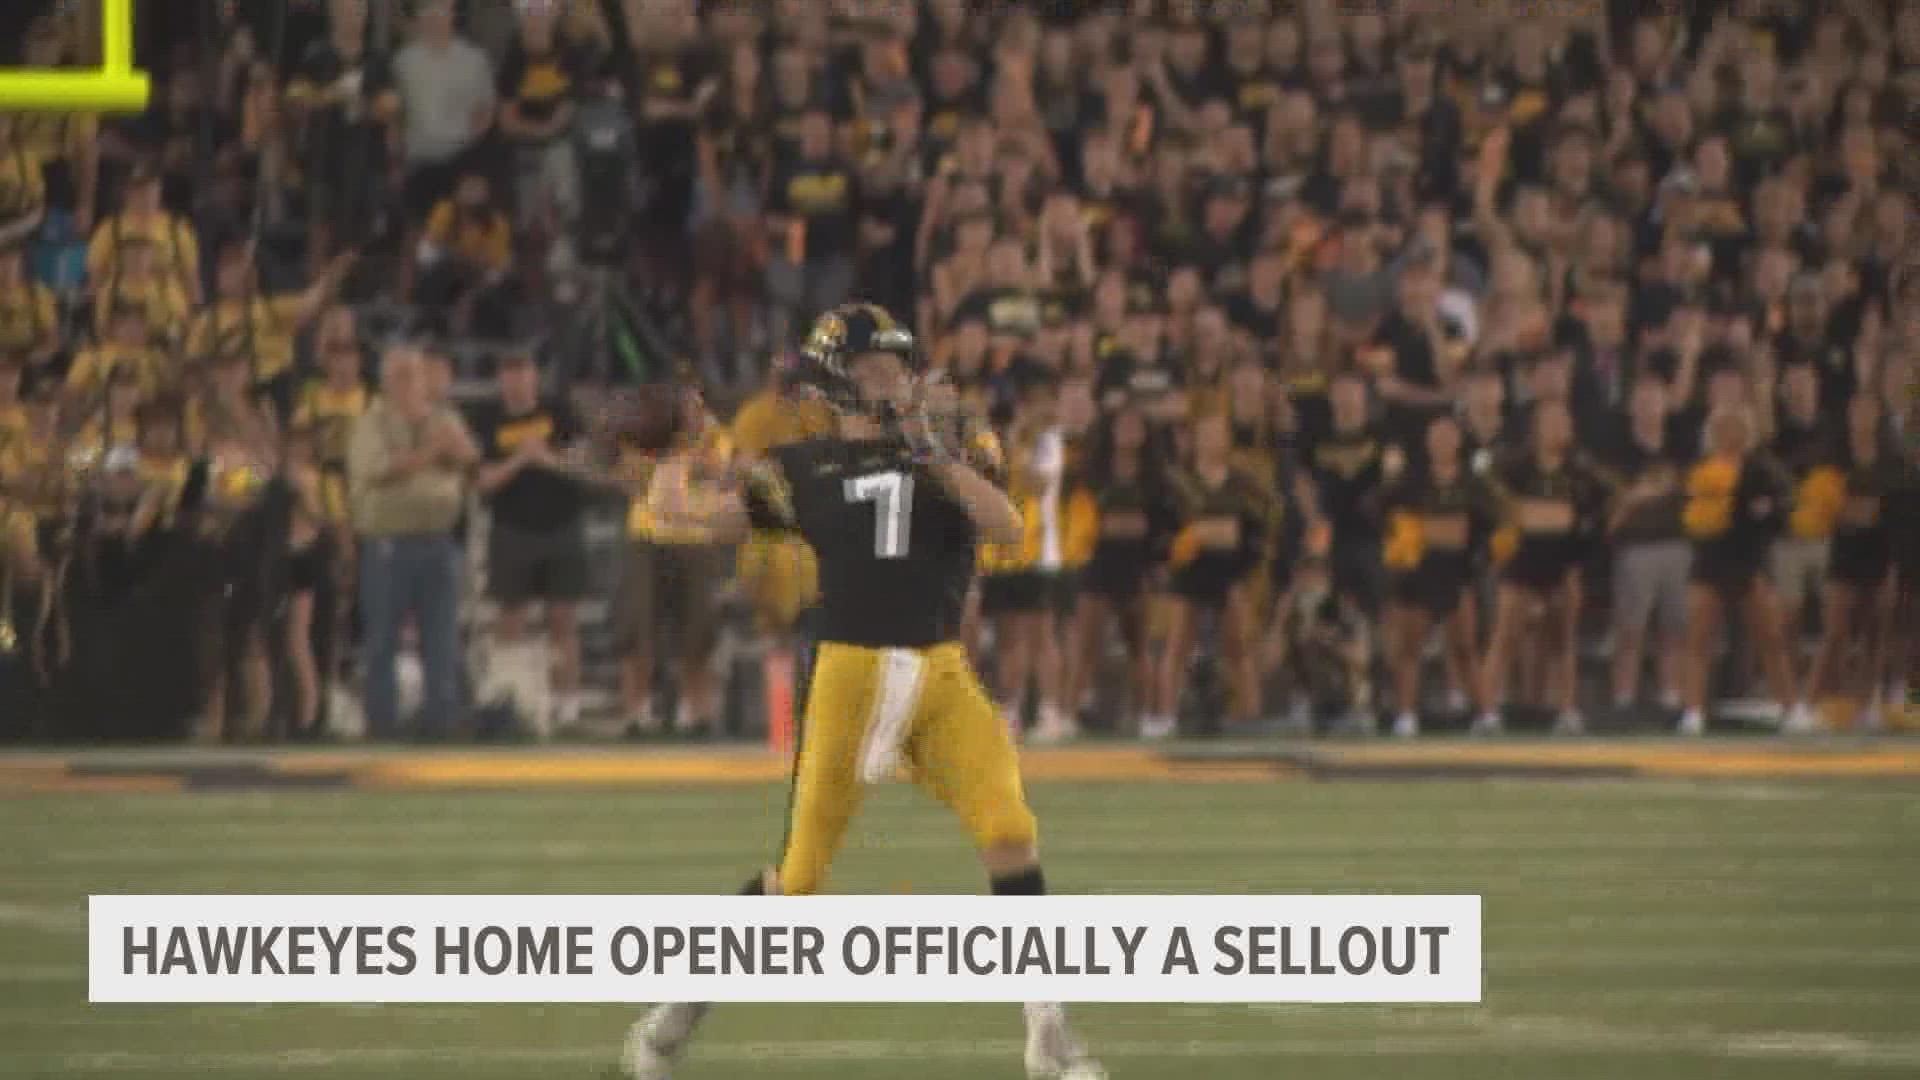 The game on Sept. 3 becomes the sixth Iowa game to sell out. The rivalry game between Iowa and Nebraska on Black Friday is the only game with tickets left.